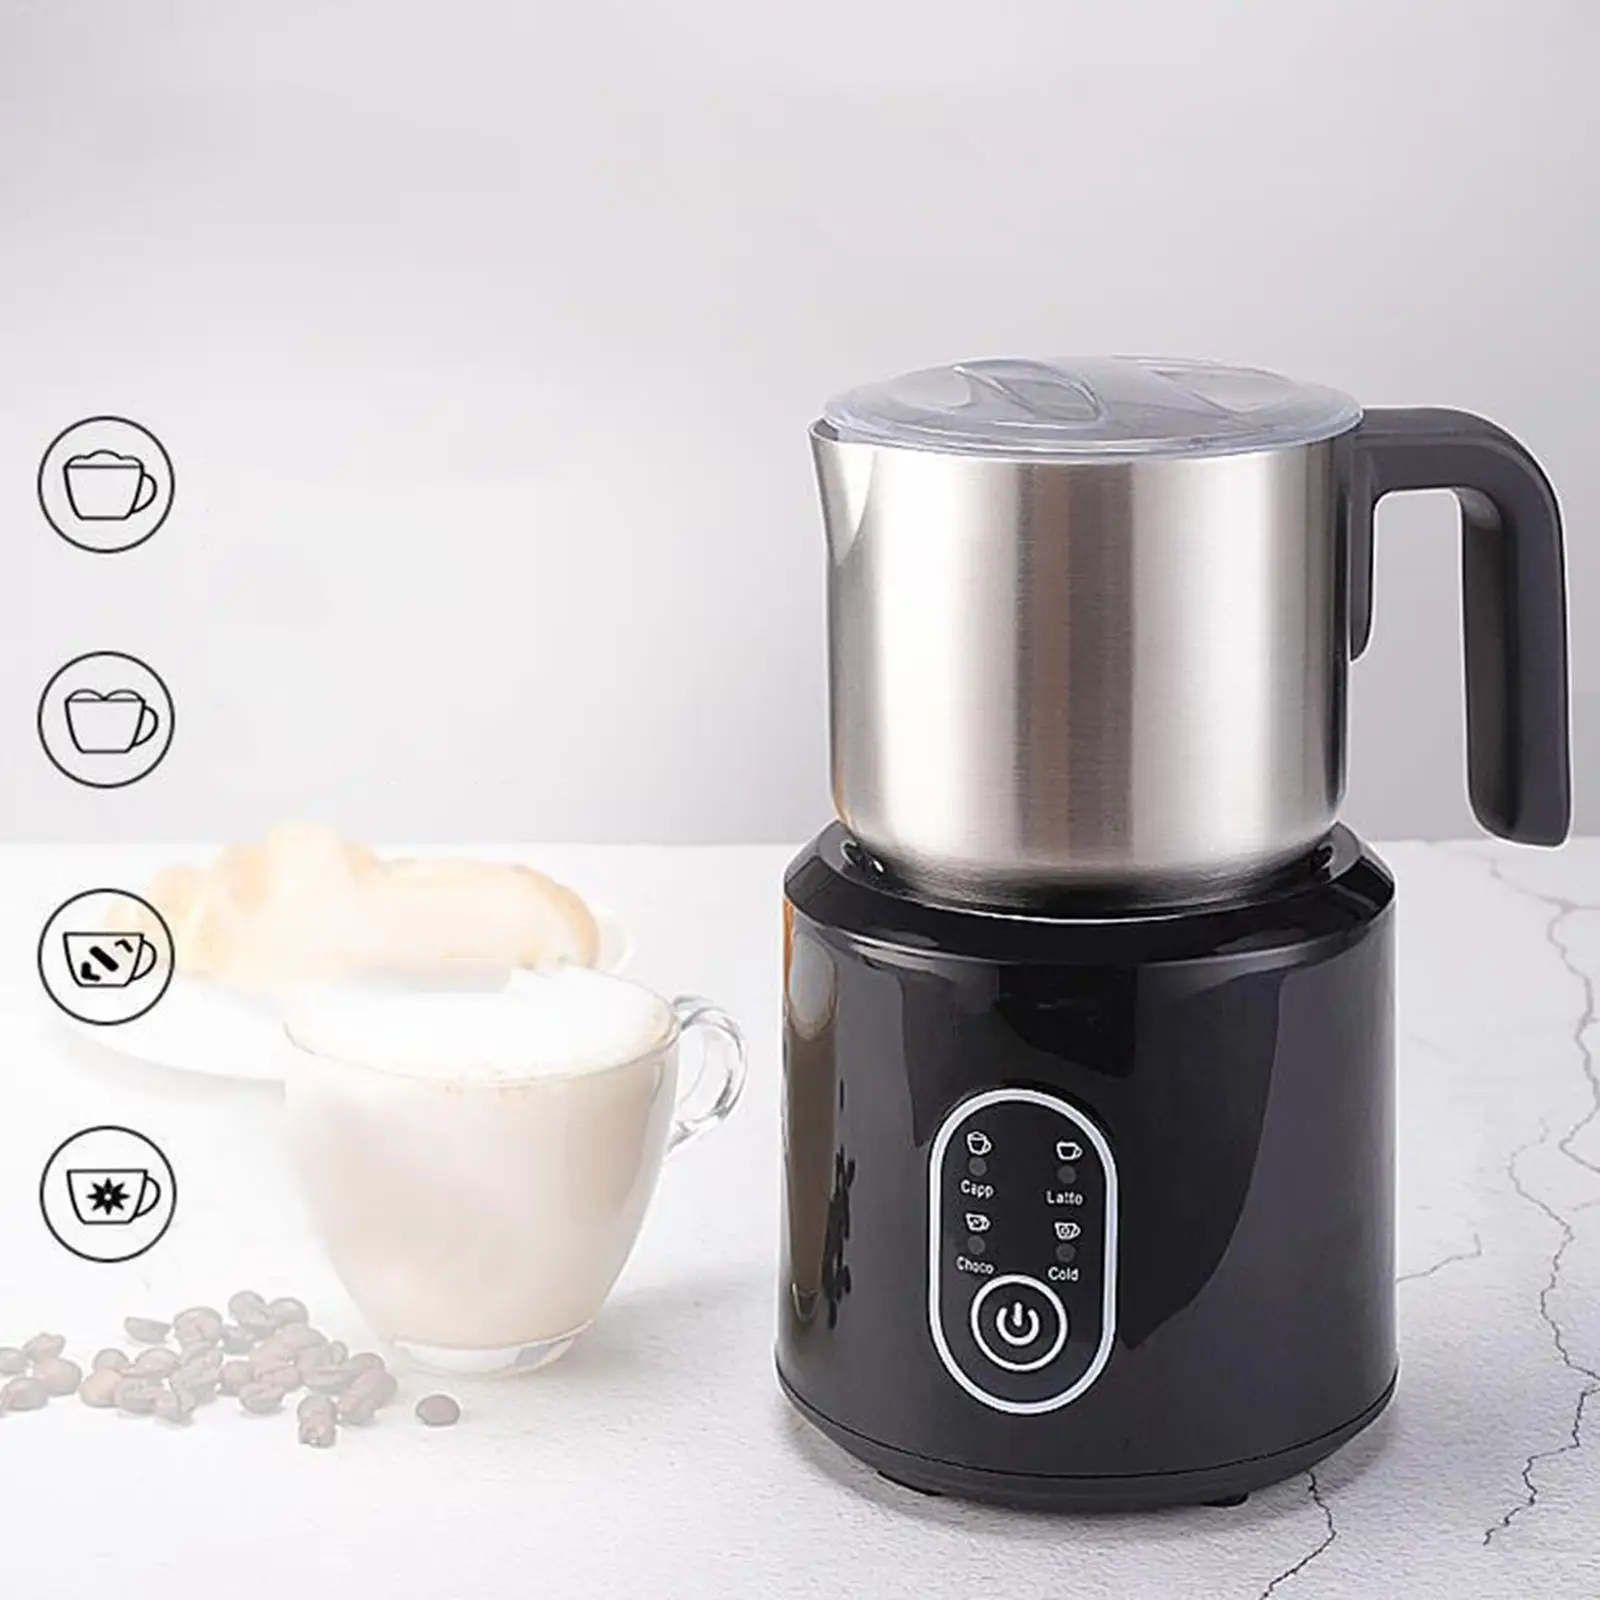 700ml Milk Frother, Detachable Dishwasher Safe Stainless Steel Black Electric Foam Machine for Cappuccinos Hot Chocolate Kitchen